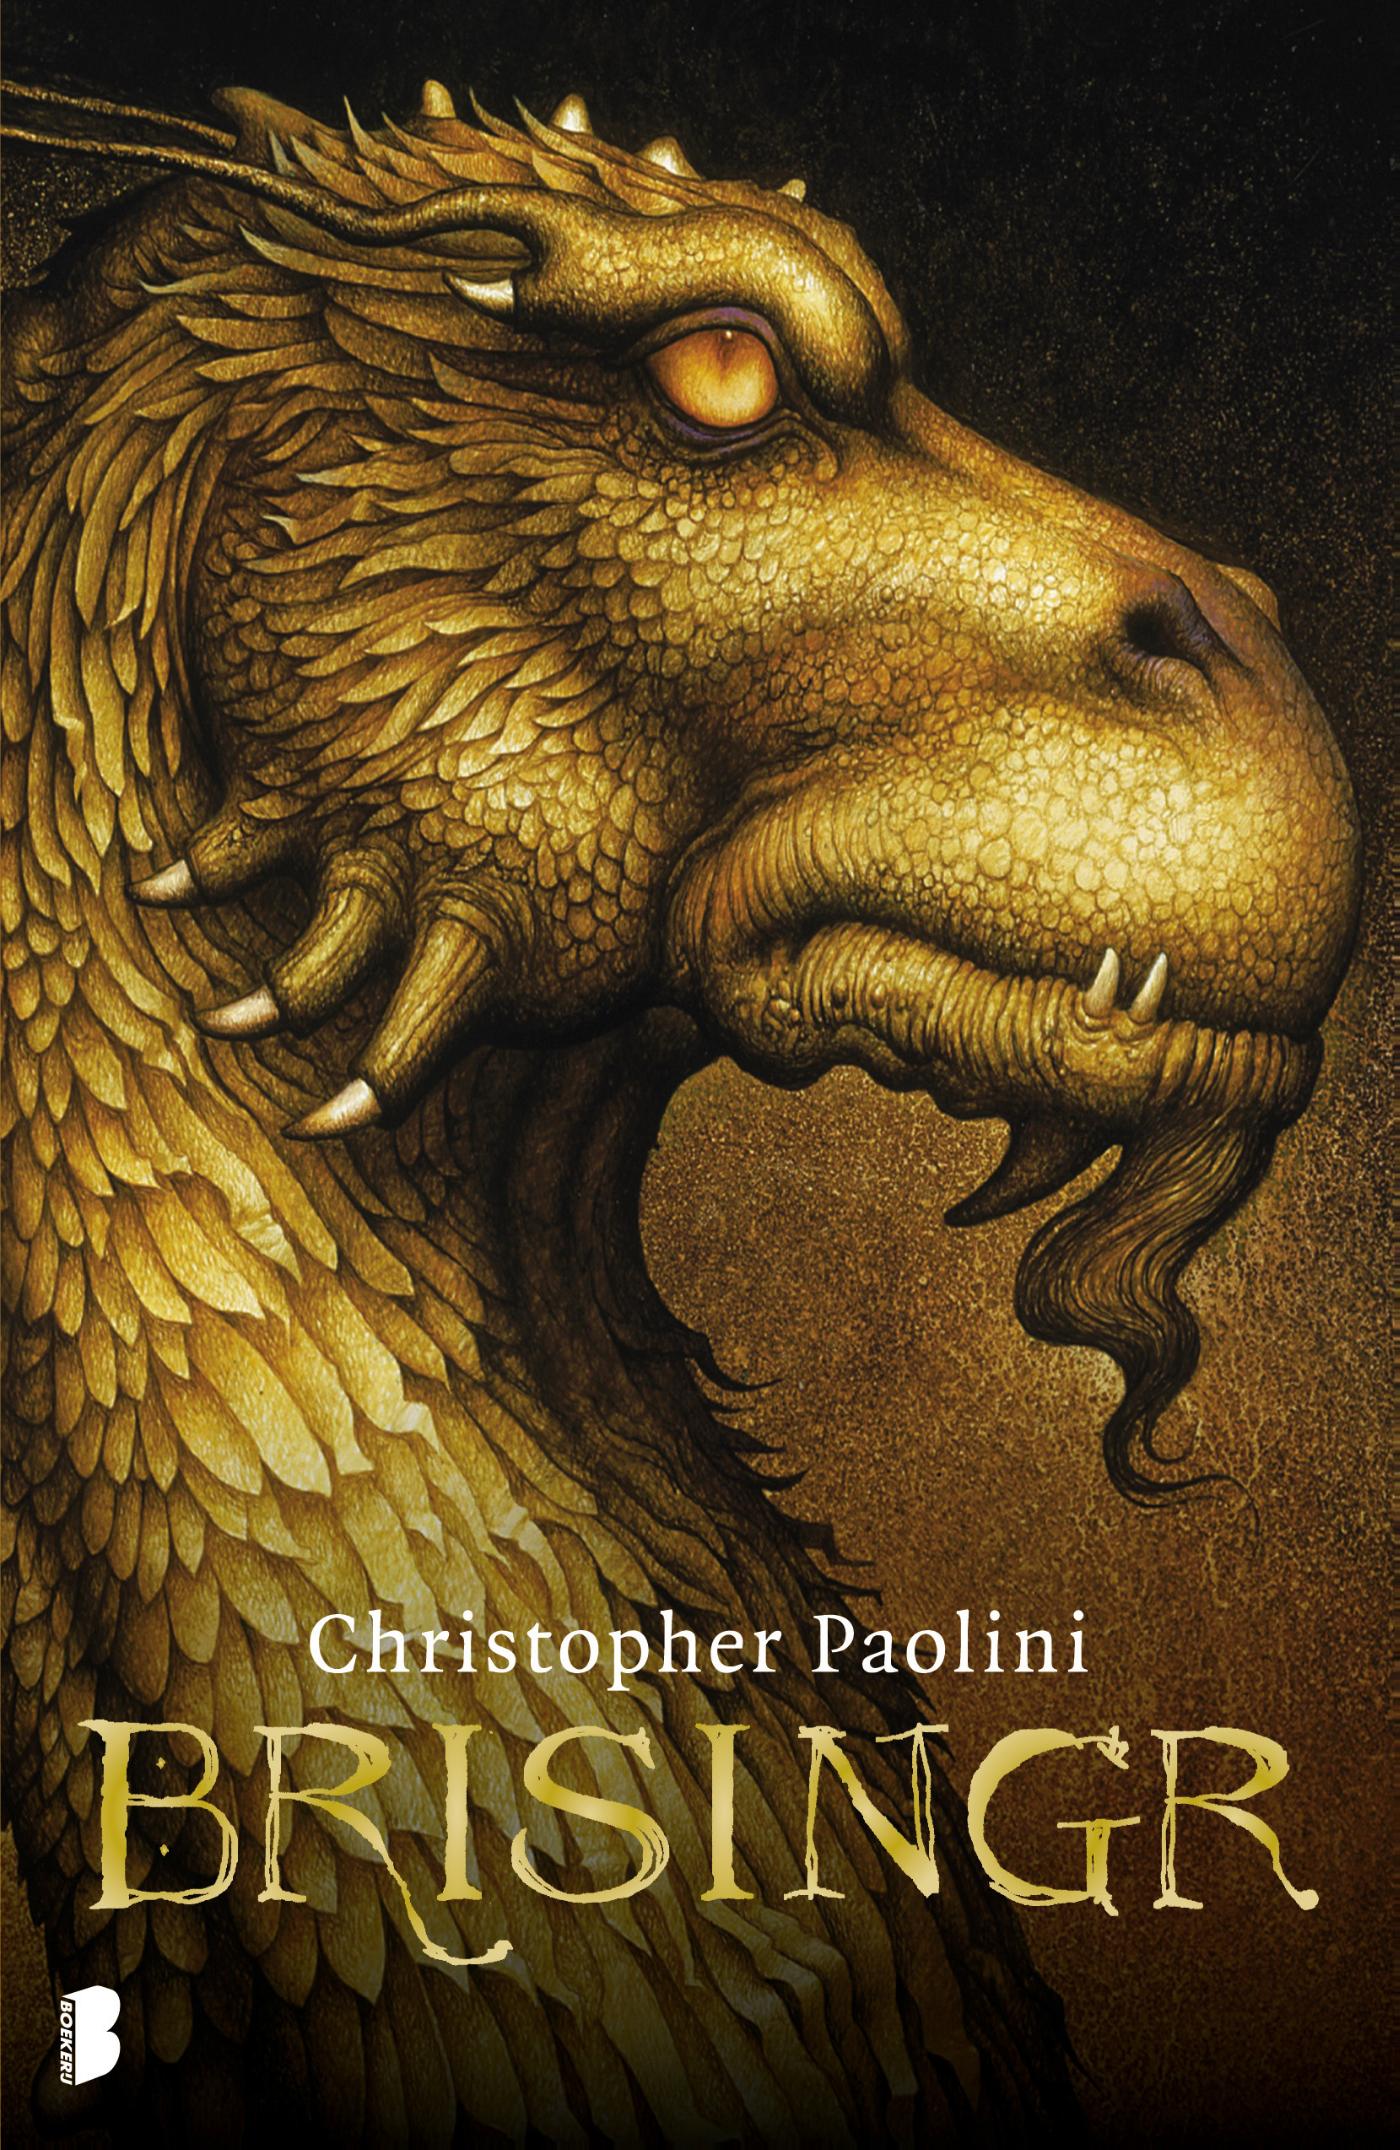 Christopher Paolini: Brisingr (Hardcover, 2008, Alfred A. Knopf)